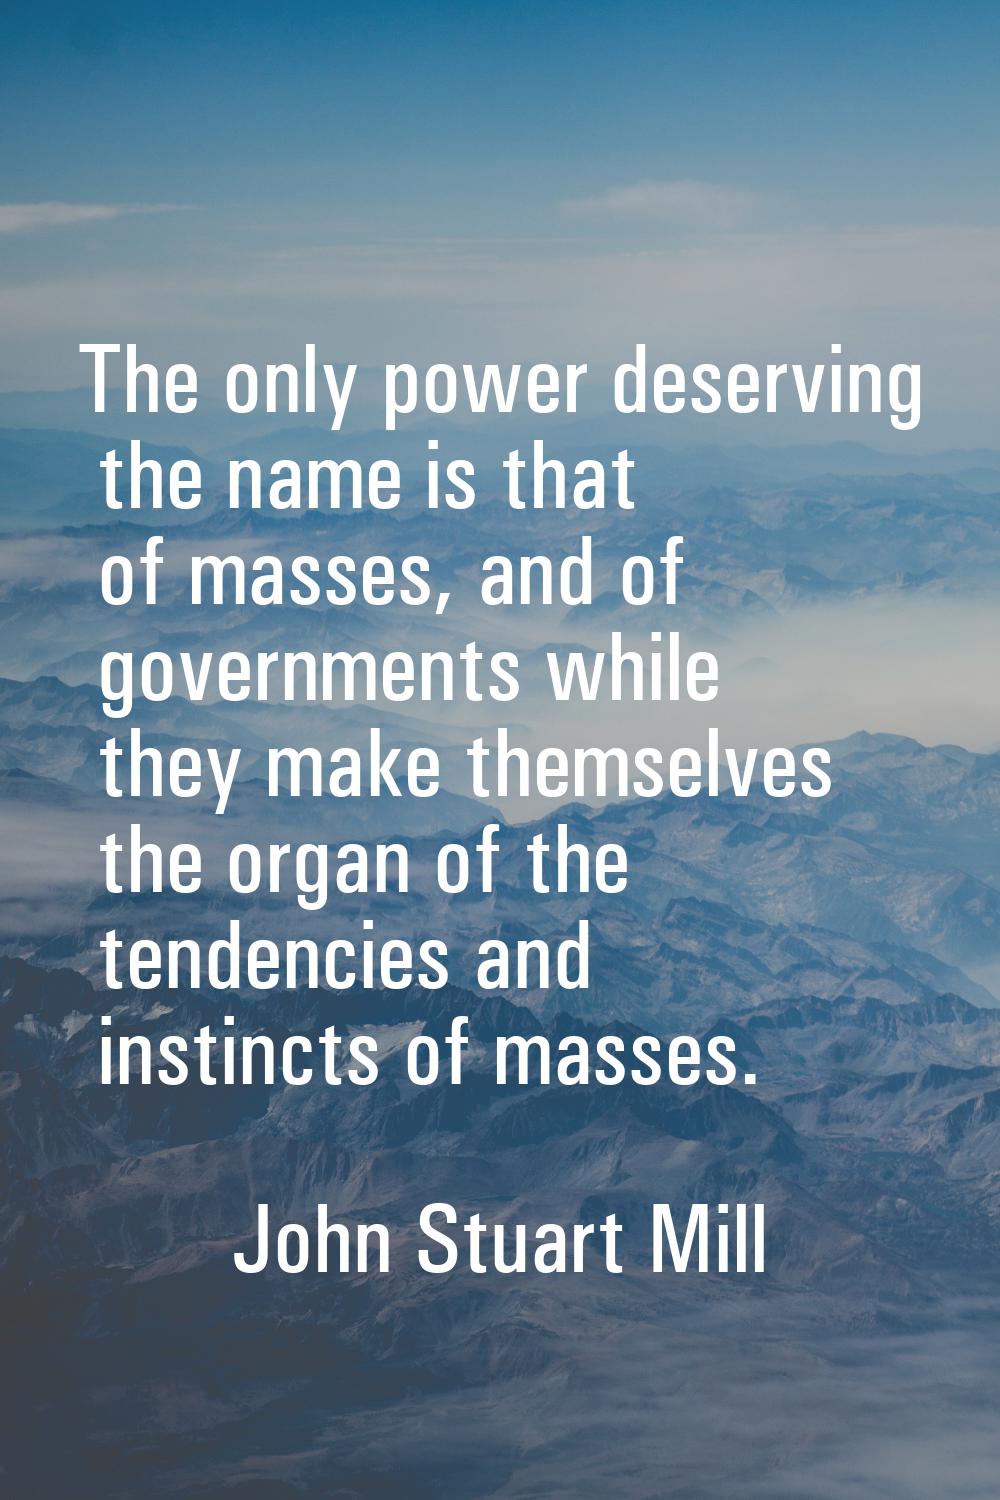 The only power deserving the name is that of masses, and of governments while they make themselves 